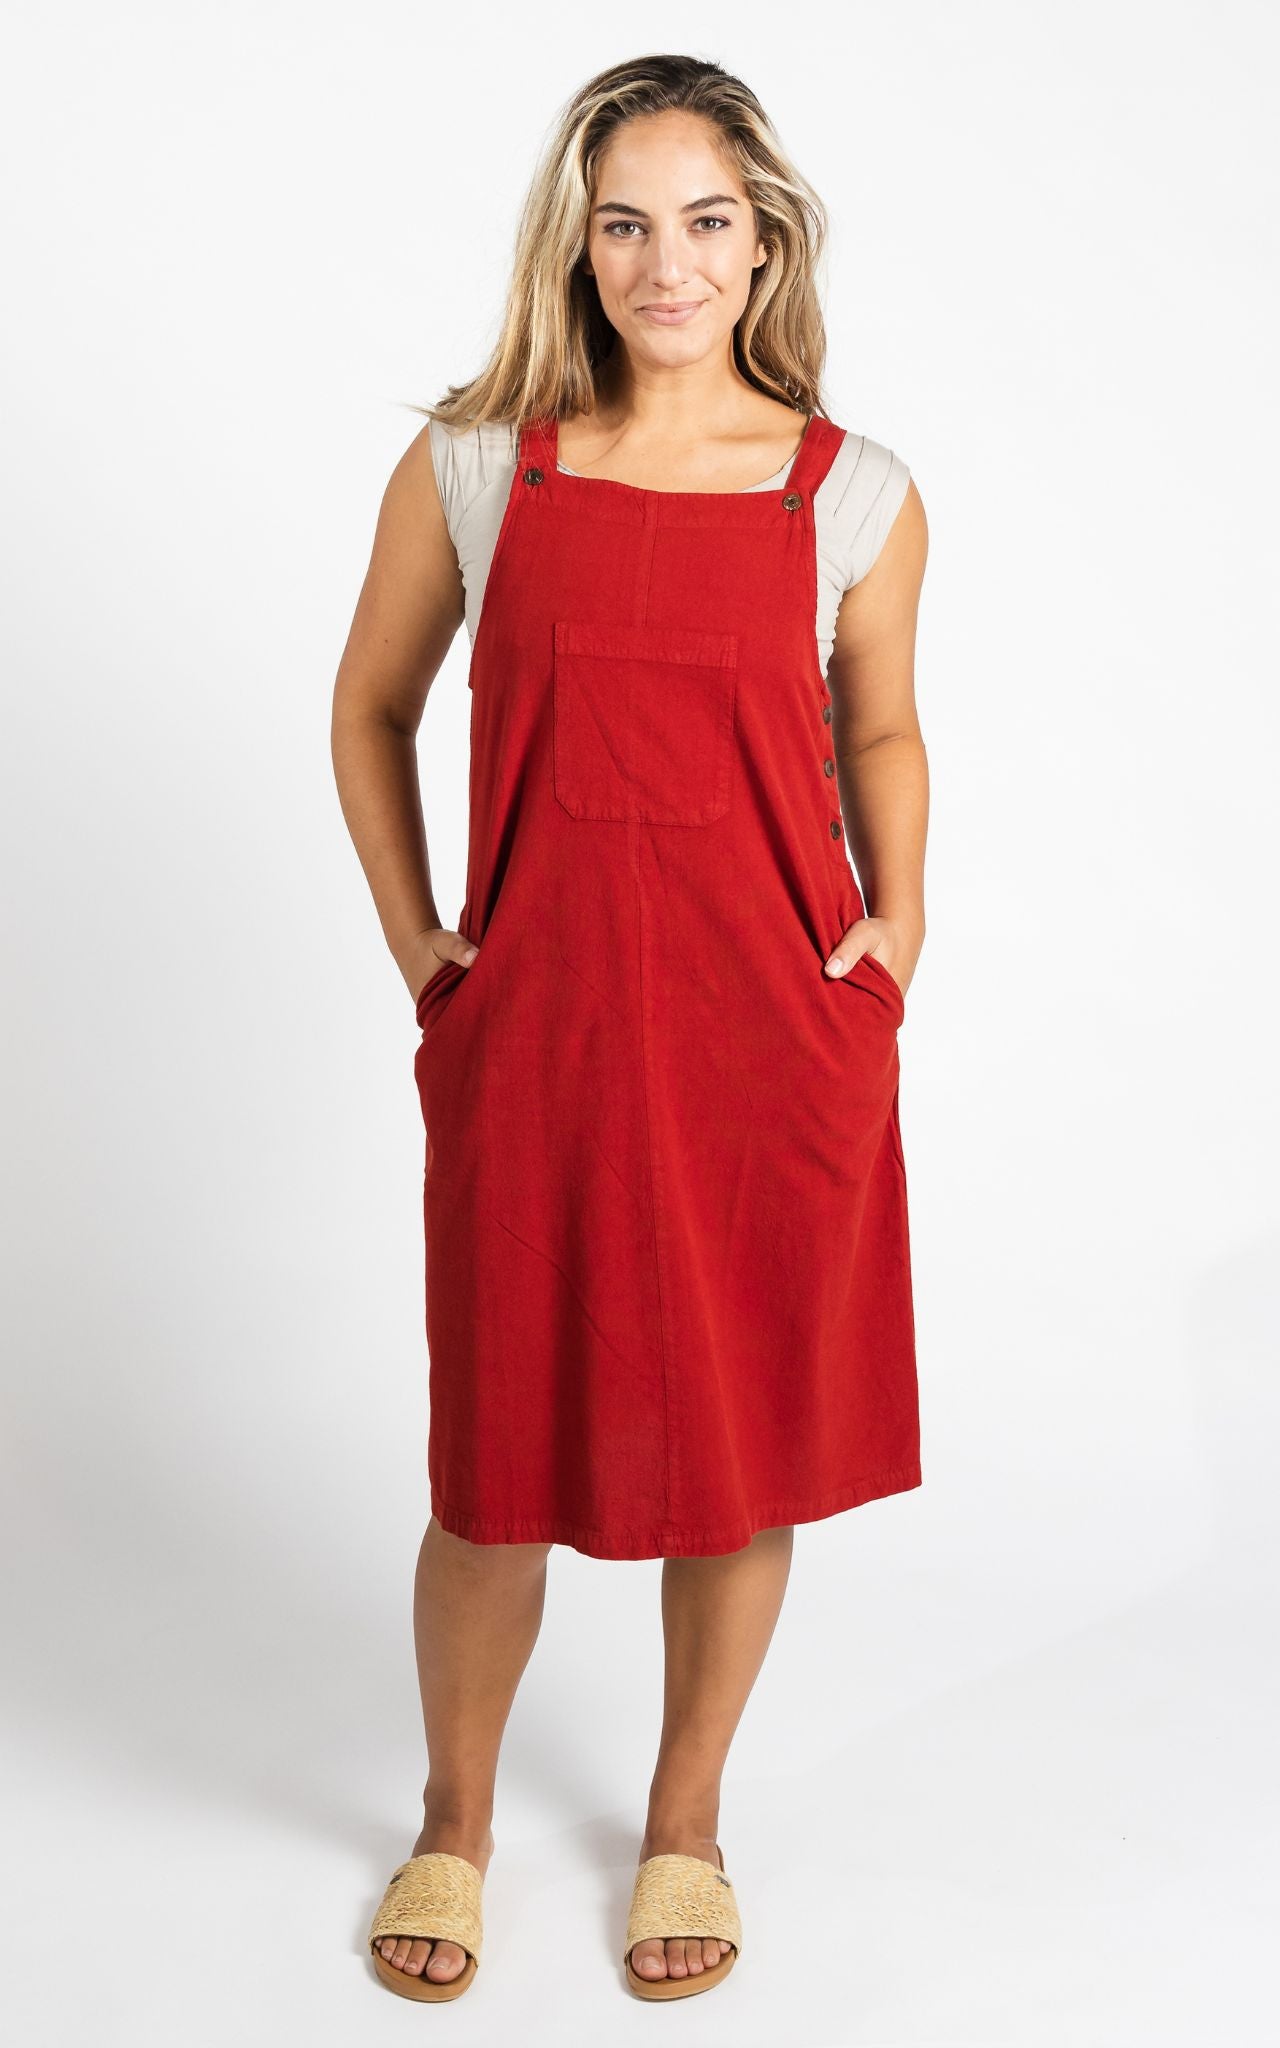 Surya Australia Ethical Cotton 'Ayla' Pinafore made in Nepal - Rust